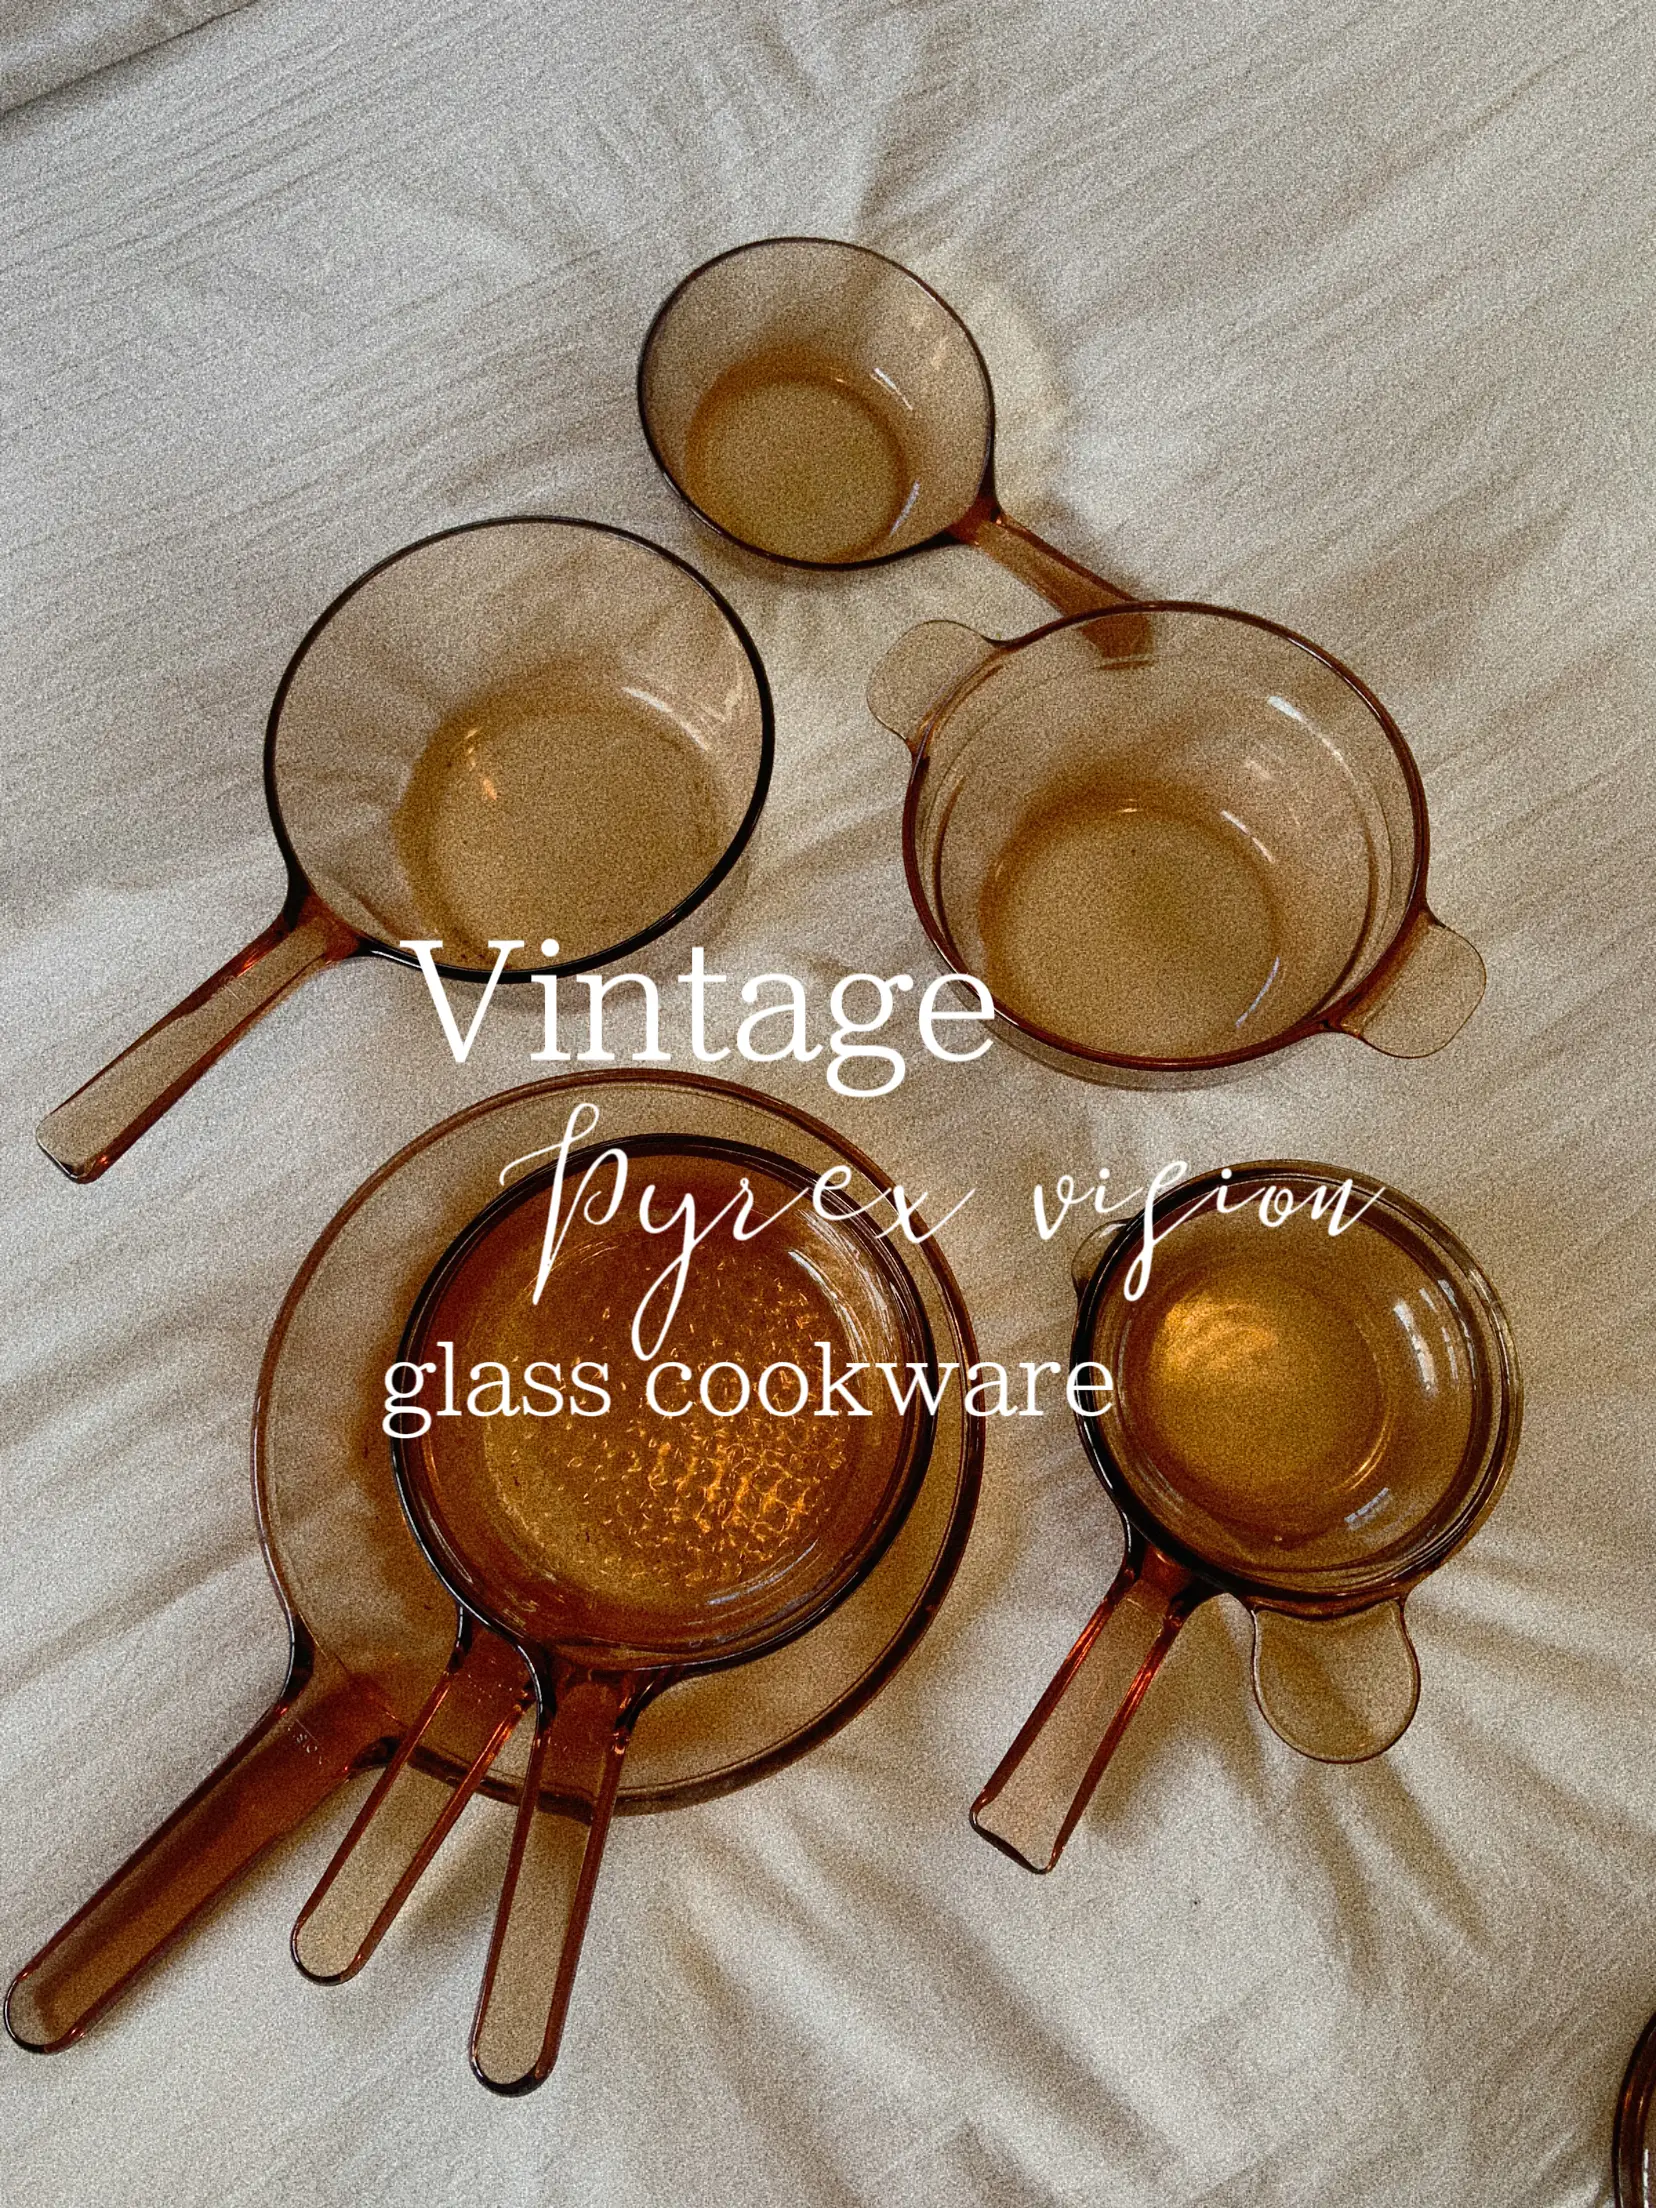 My Aesthetic Glassware Collection  Gallery posted by Yealim Kong